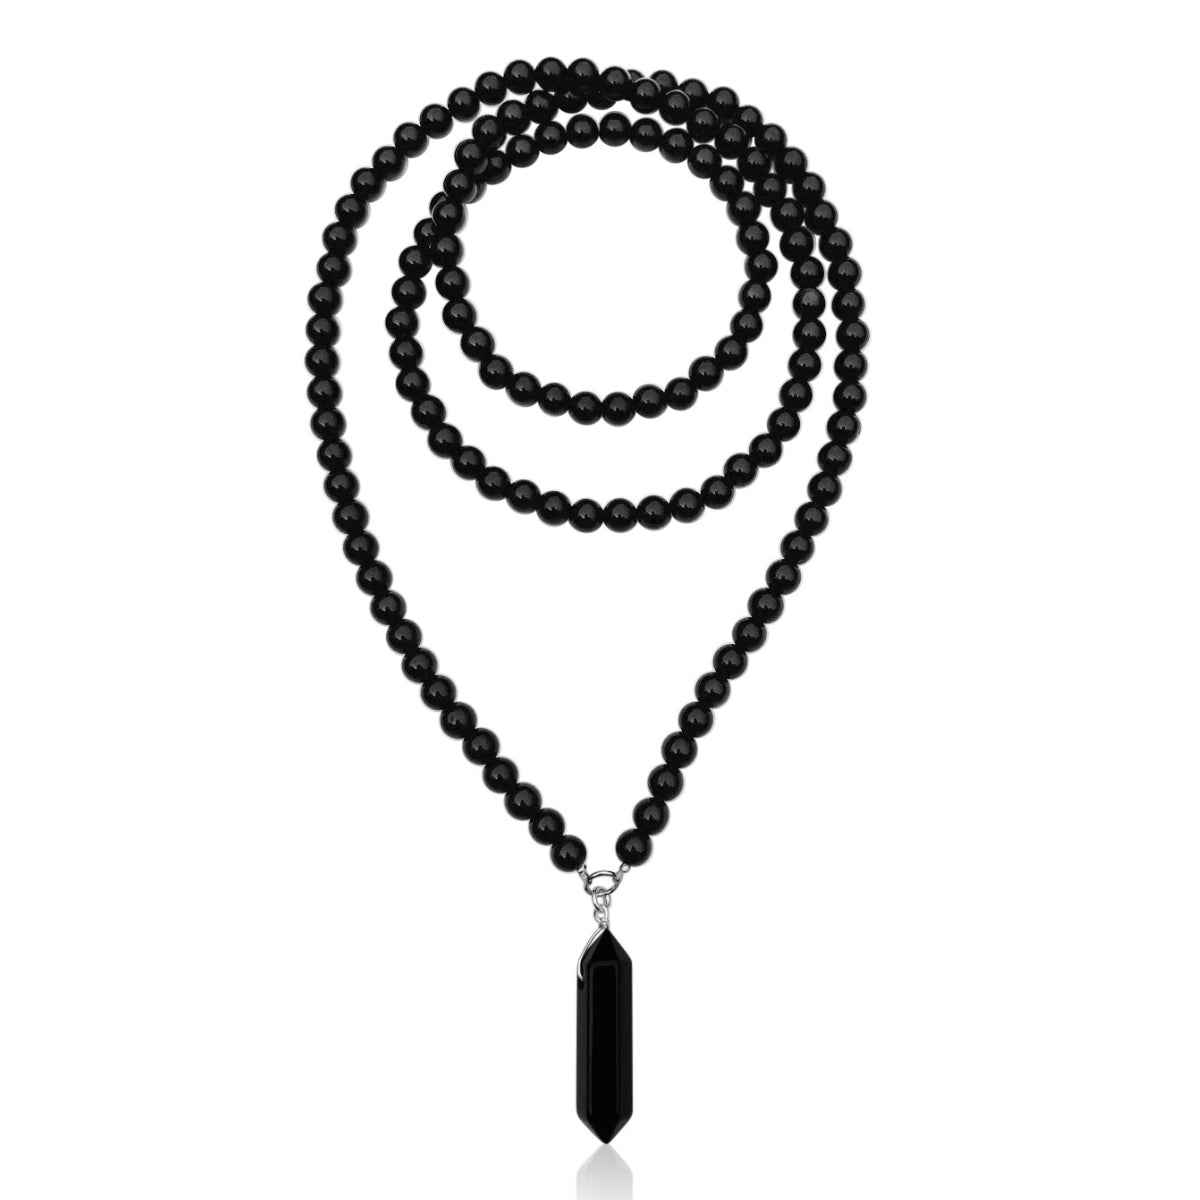 The Obsidian and Onyx Shield Necklace feature two powerful protective stones. It is believed to shield against negative energy, providing a sense of safety and security.